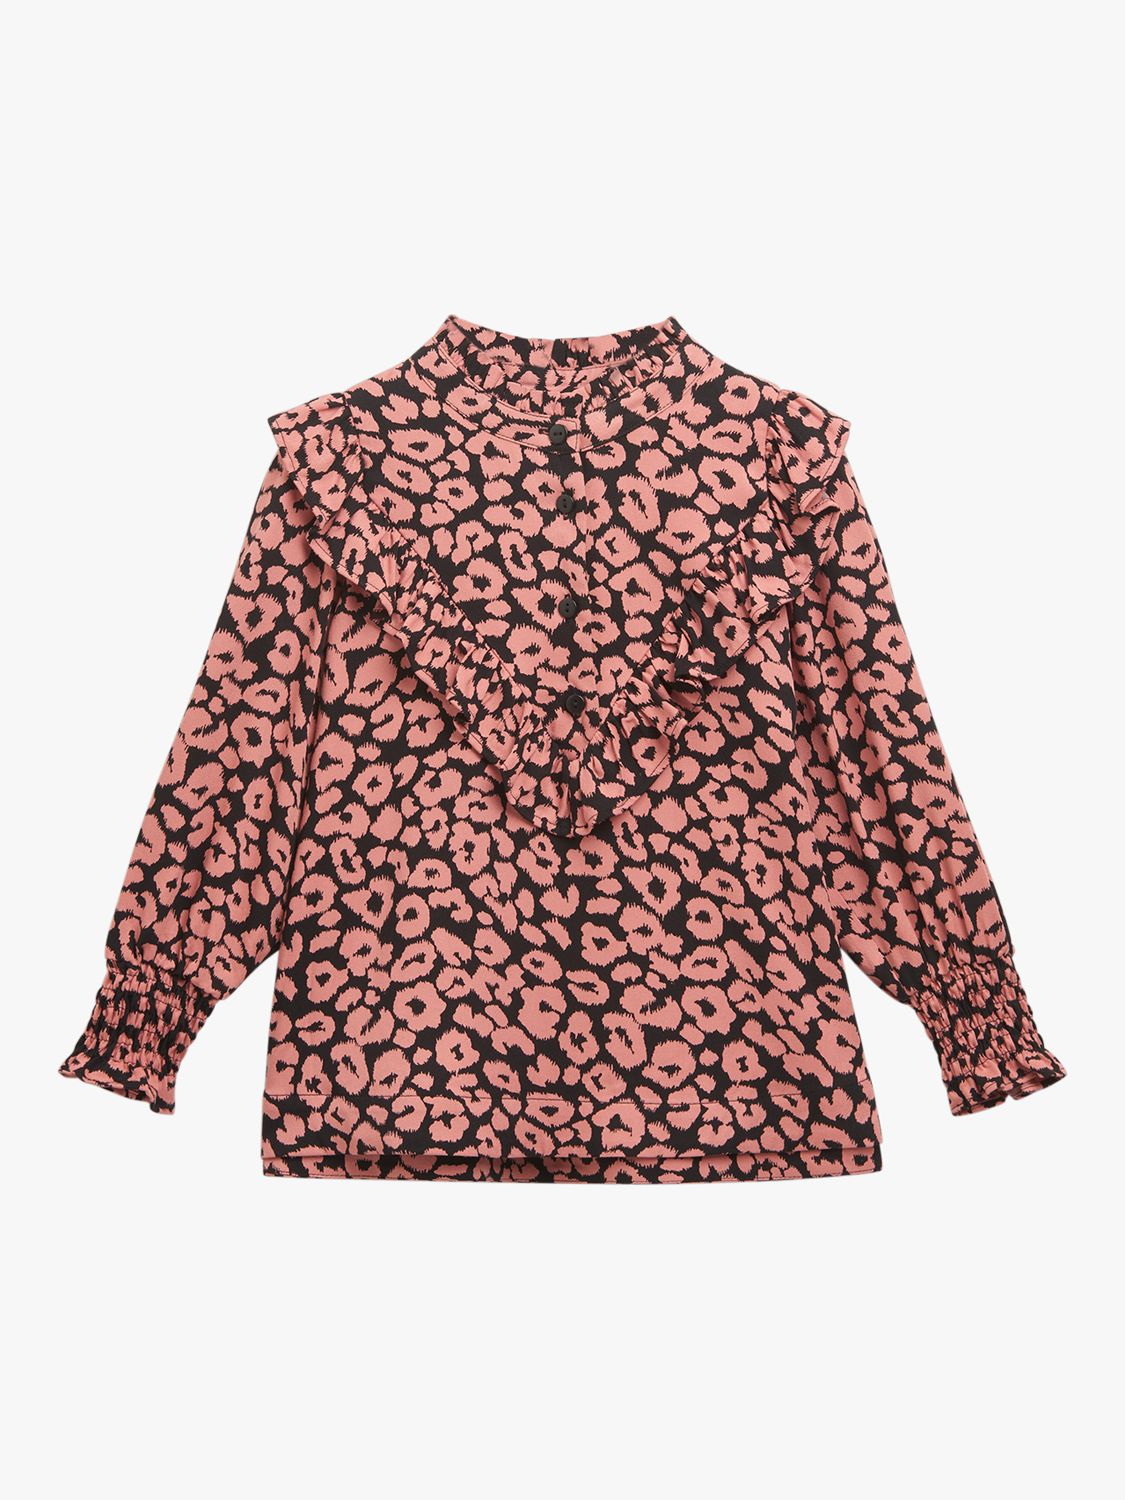 Buy Whistles Kids' Riley Fuzzy Leopard Top, Pink/Multi Online at johnlewis.com